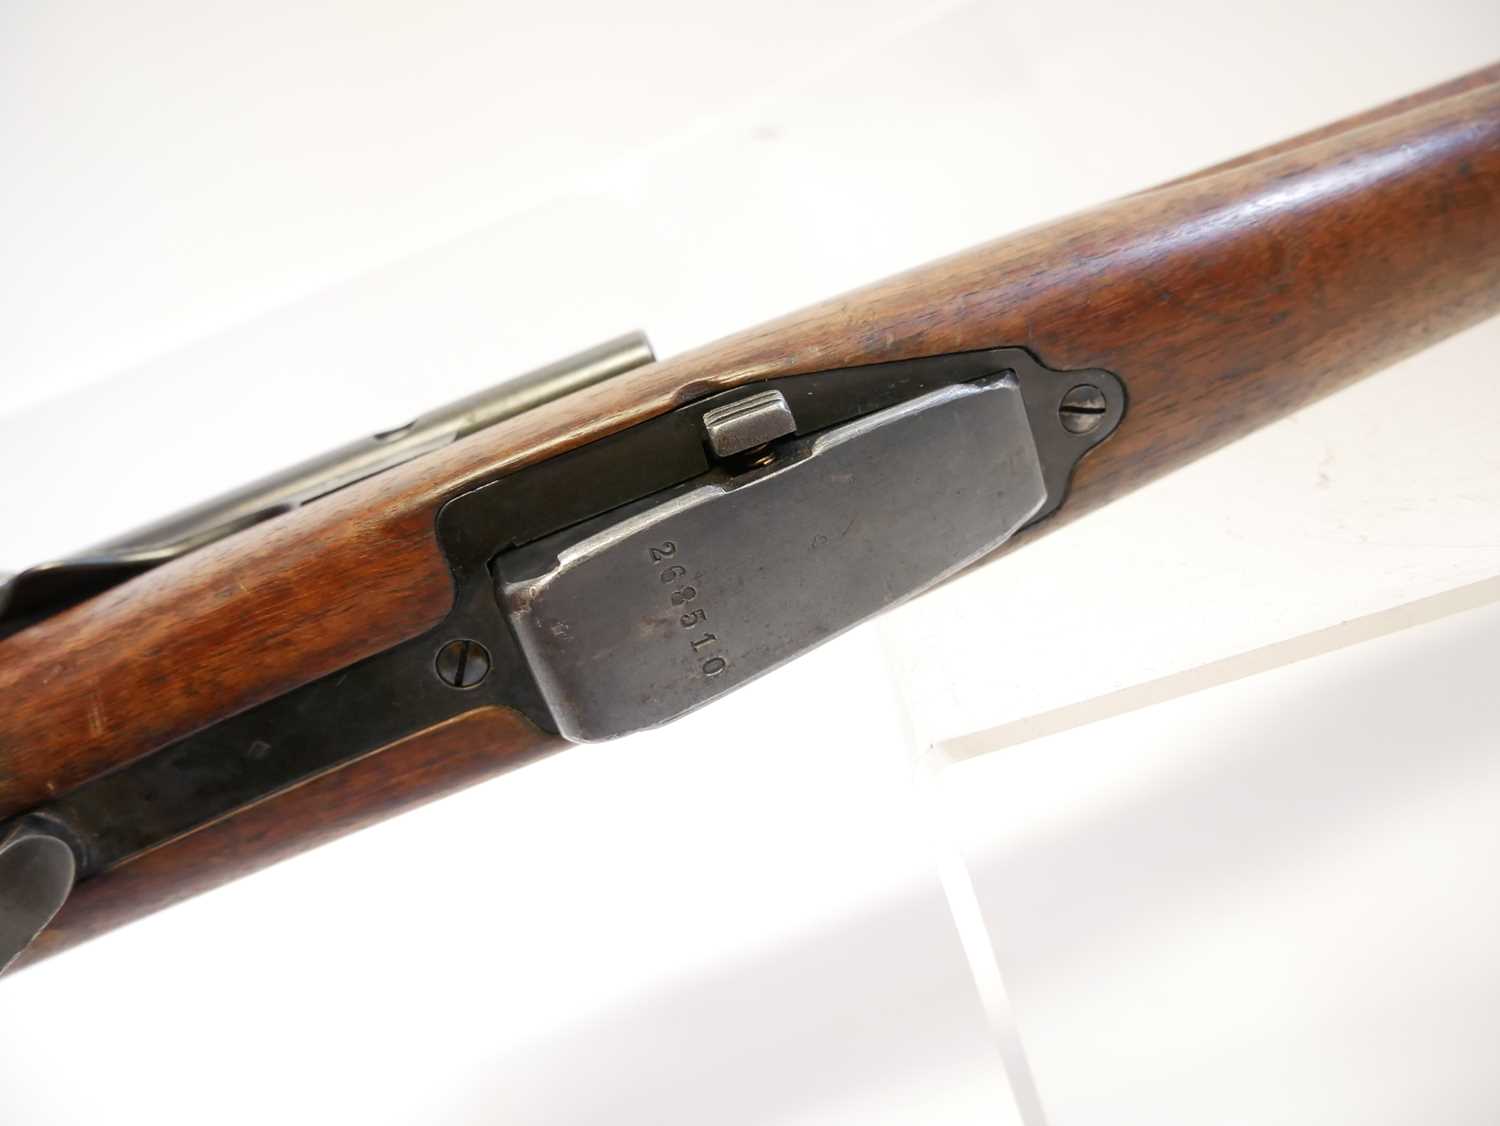 Schmidt Rubin 1896 7.5mm straight pull rifle, matching serial numbers 268510 to barrel, receiver, - Image 9 of 15